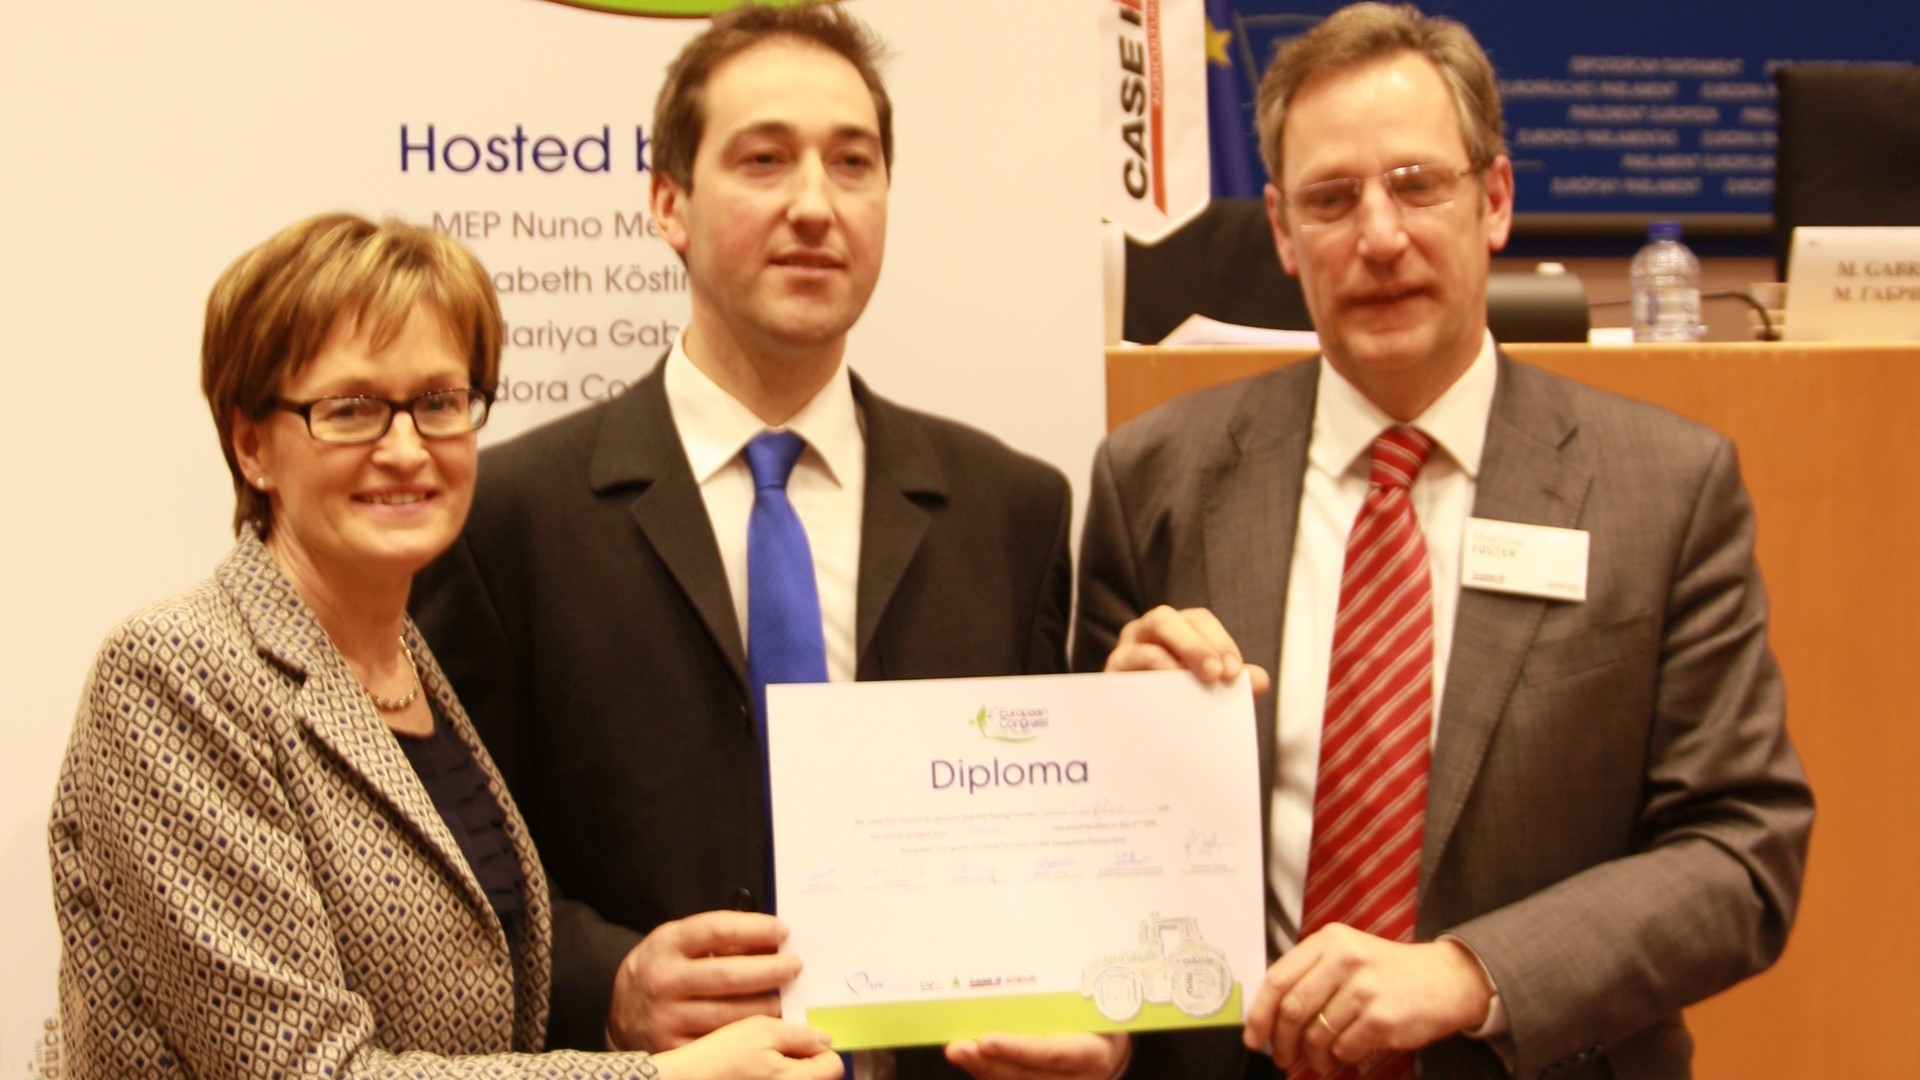 Sean Coughlan is pictured (centre) with Irish Project MEP Mairead McGuinness and Matthew Foster, Vice President of Case